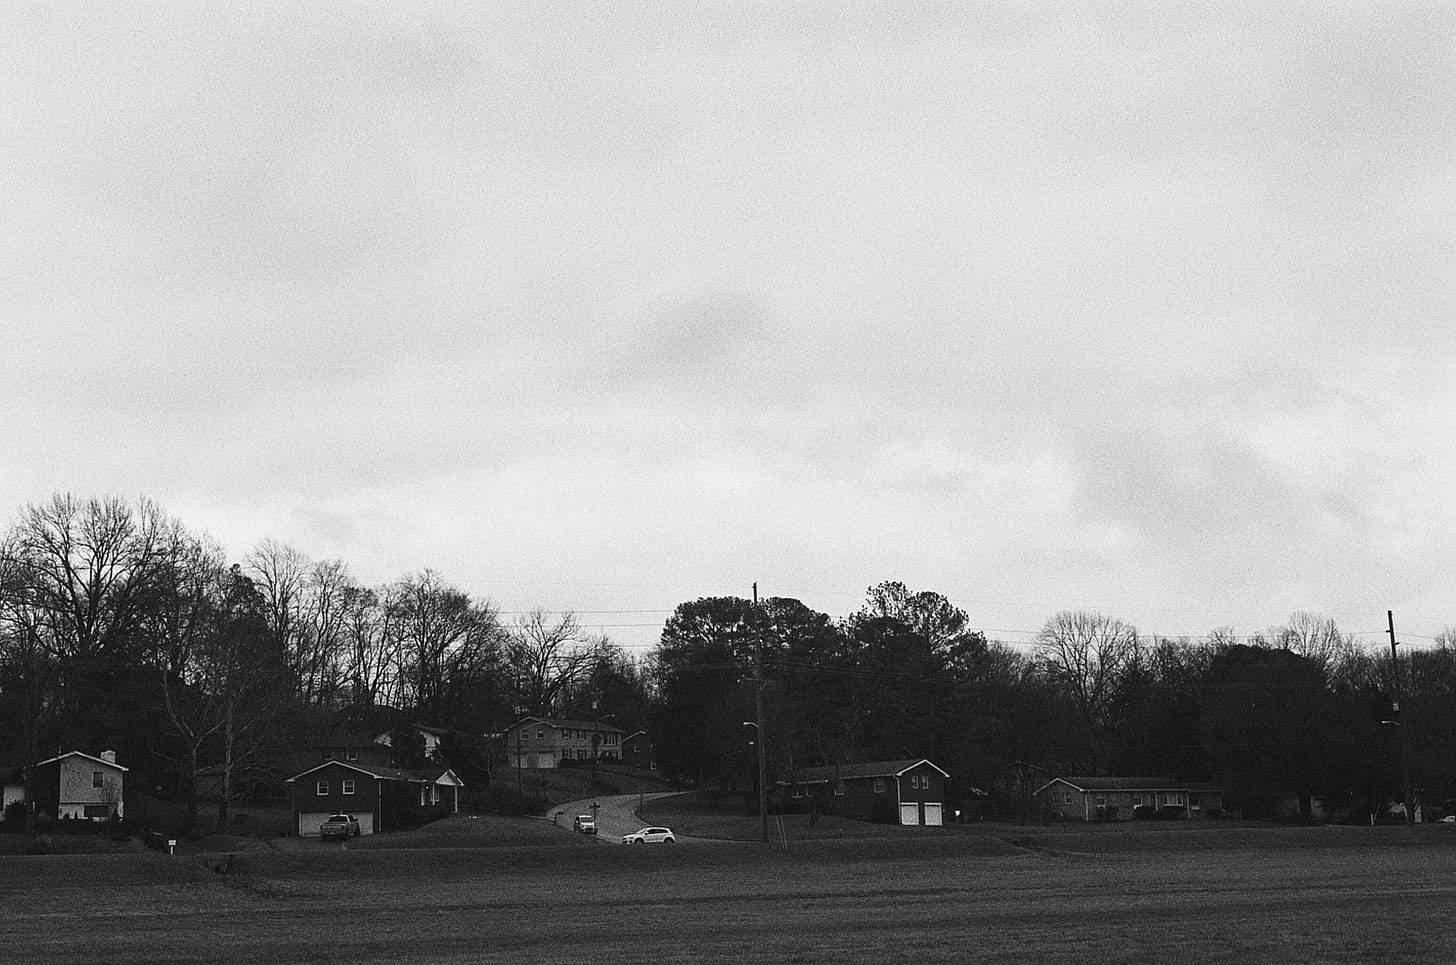 A black and white photograph of a row of houses across the road from a field. Tall trees tower behind them, but most of the photo is sky.